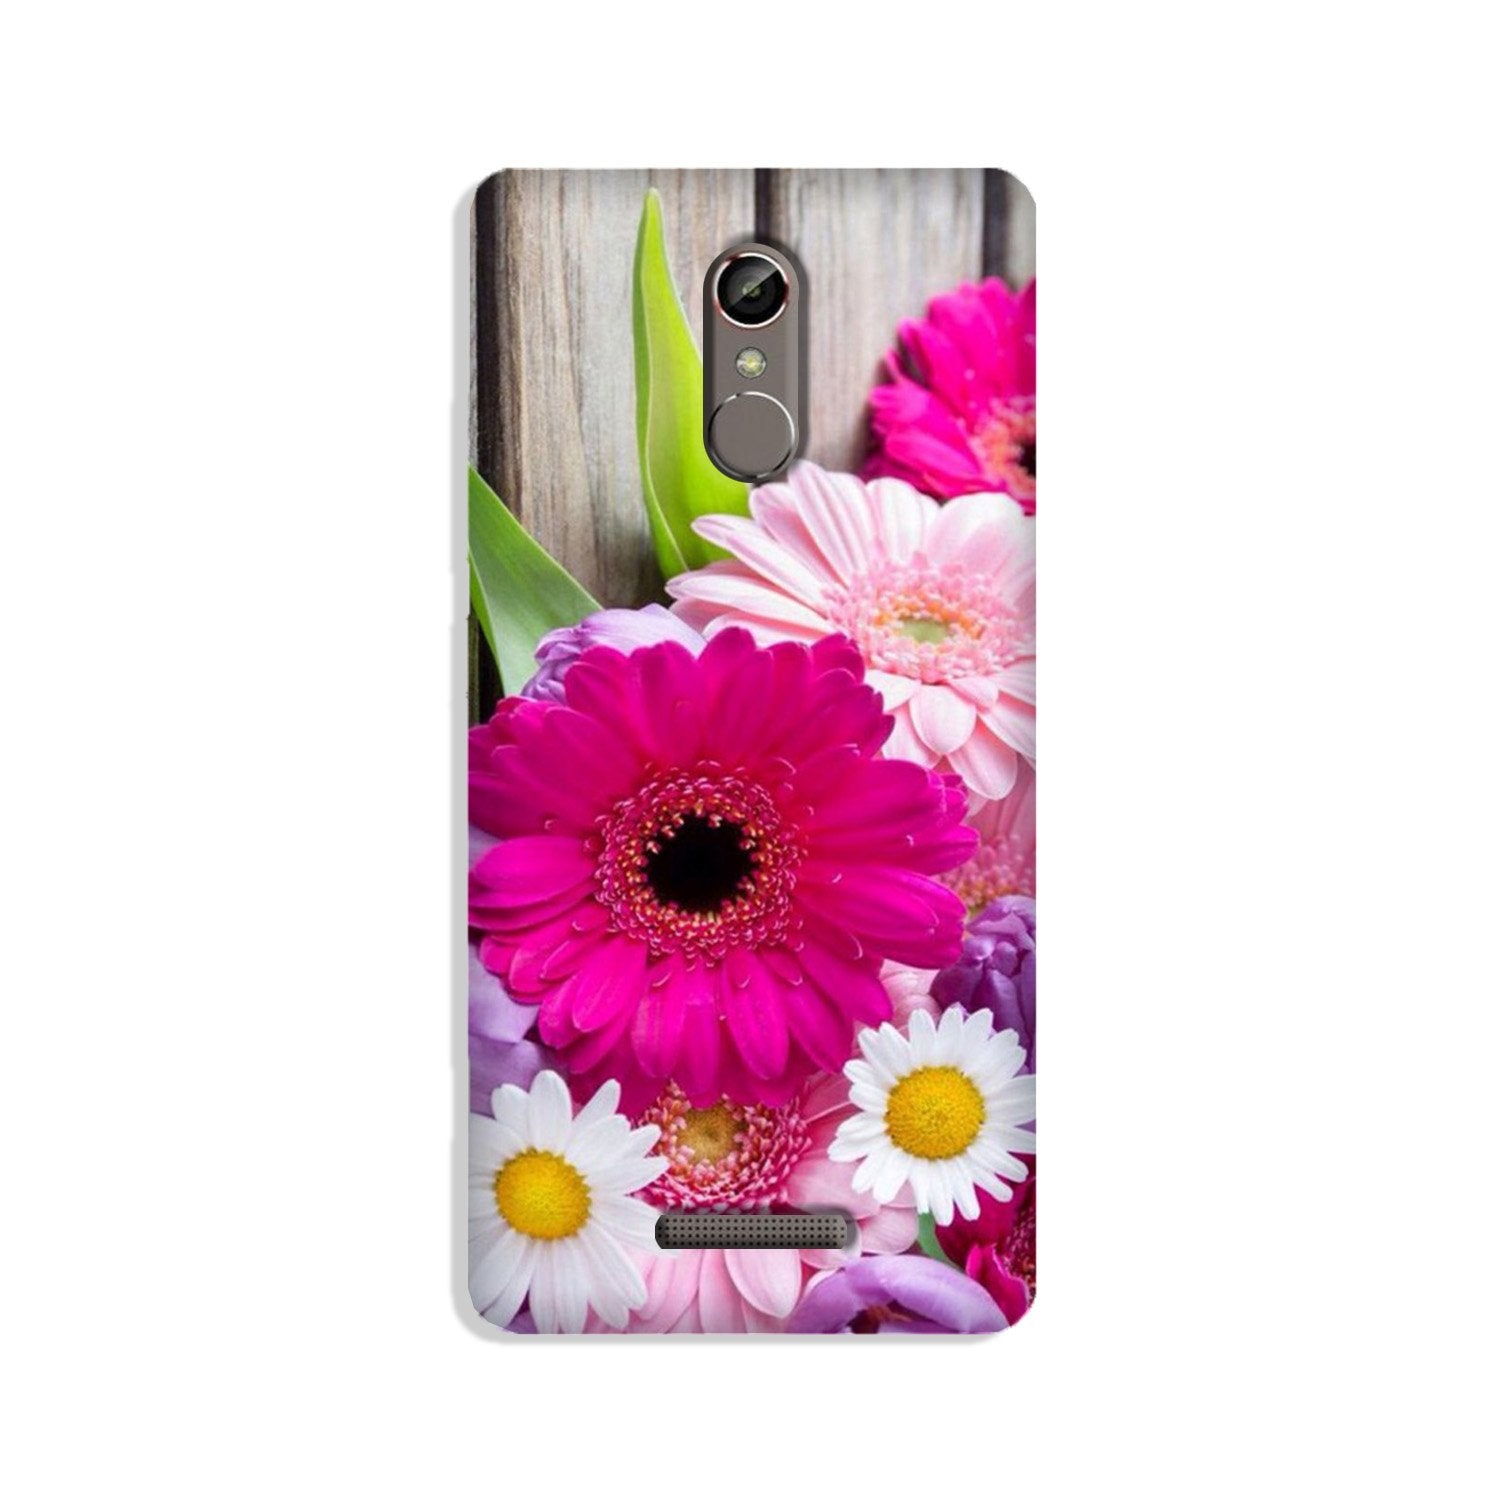 Coloful Daisy2 Case for Gionee S6s